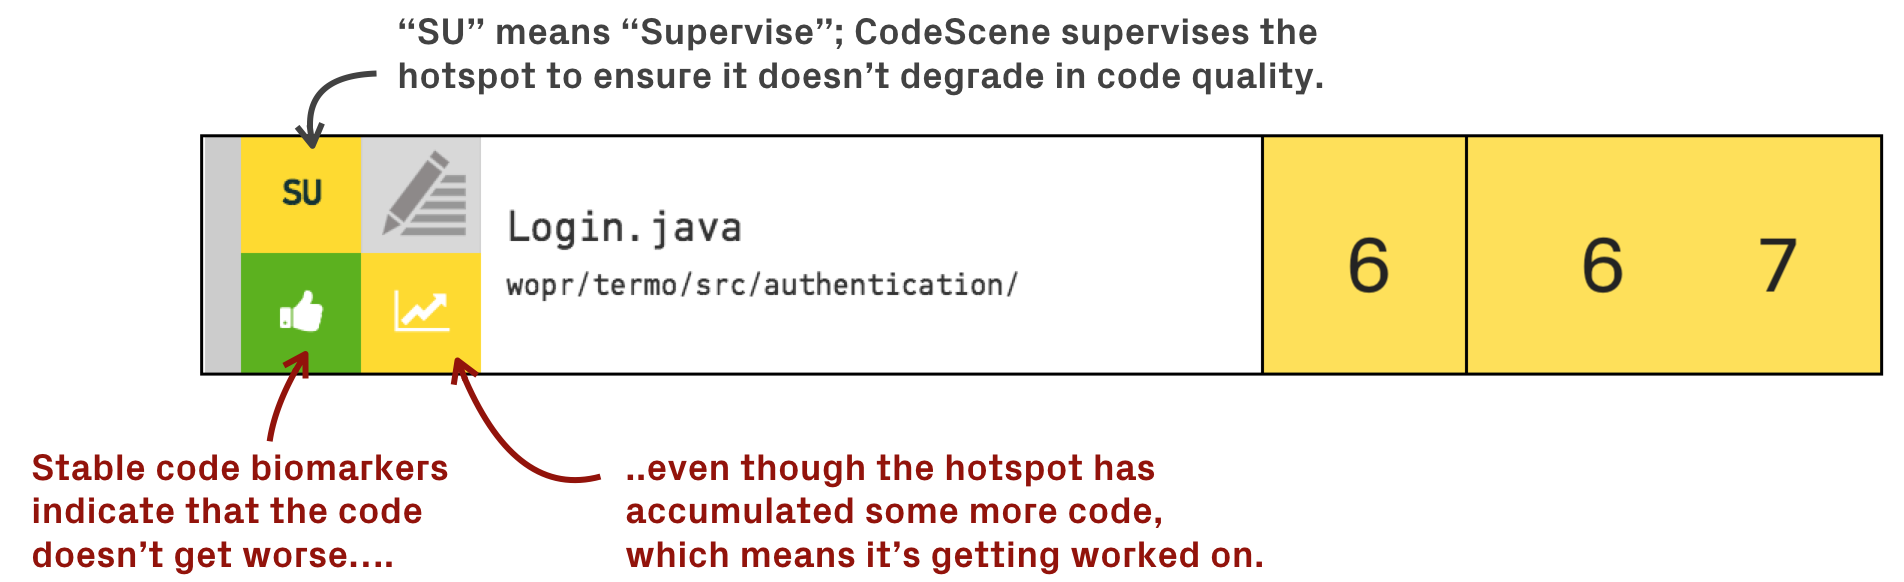 CodeScene acts as an extra team member that constantly supervises code at risk to grow worse.